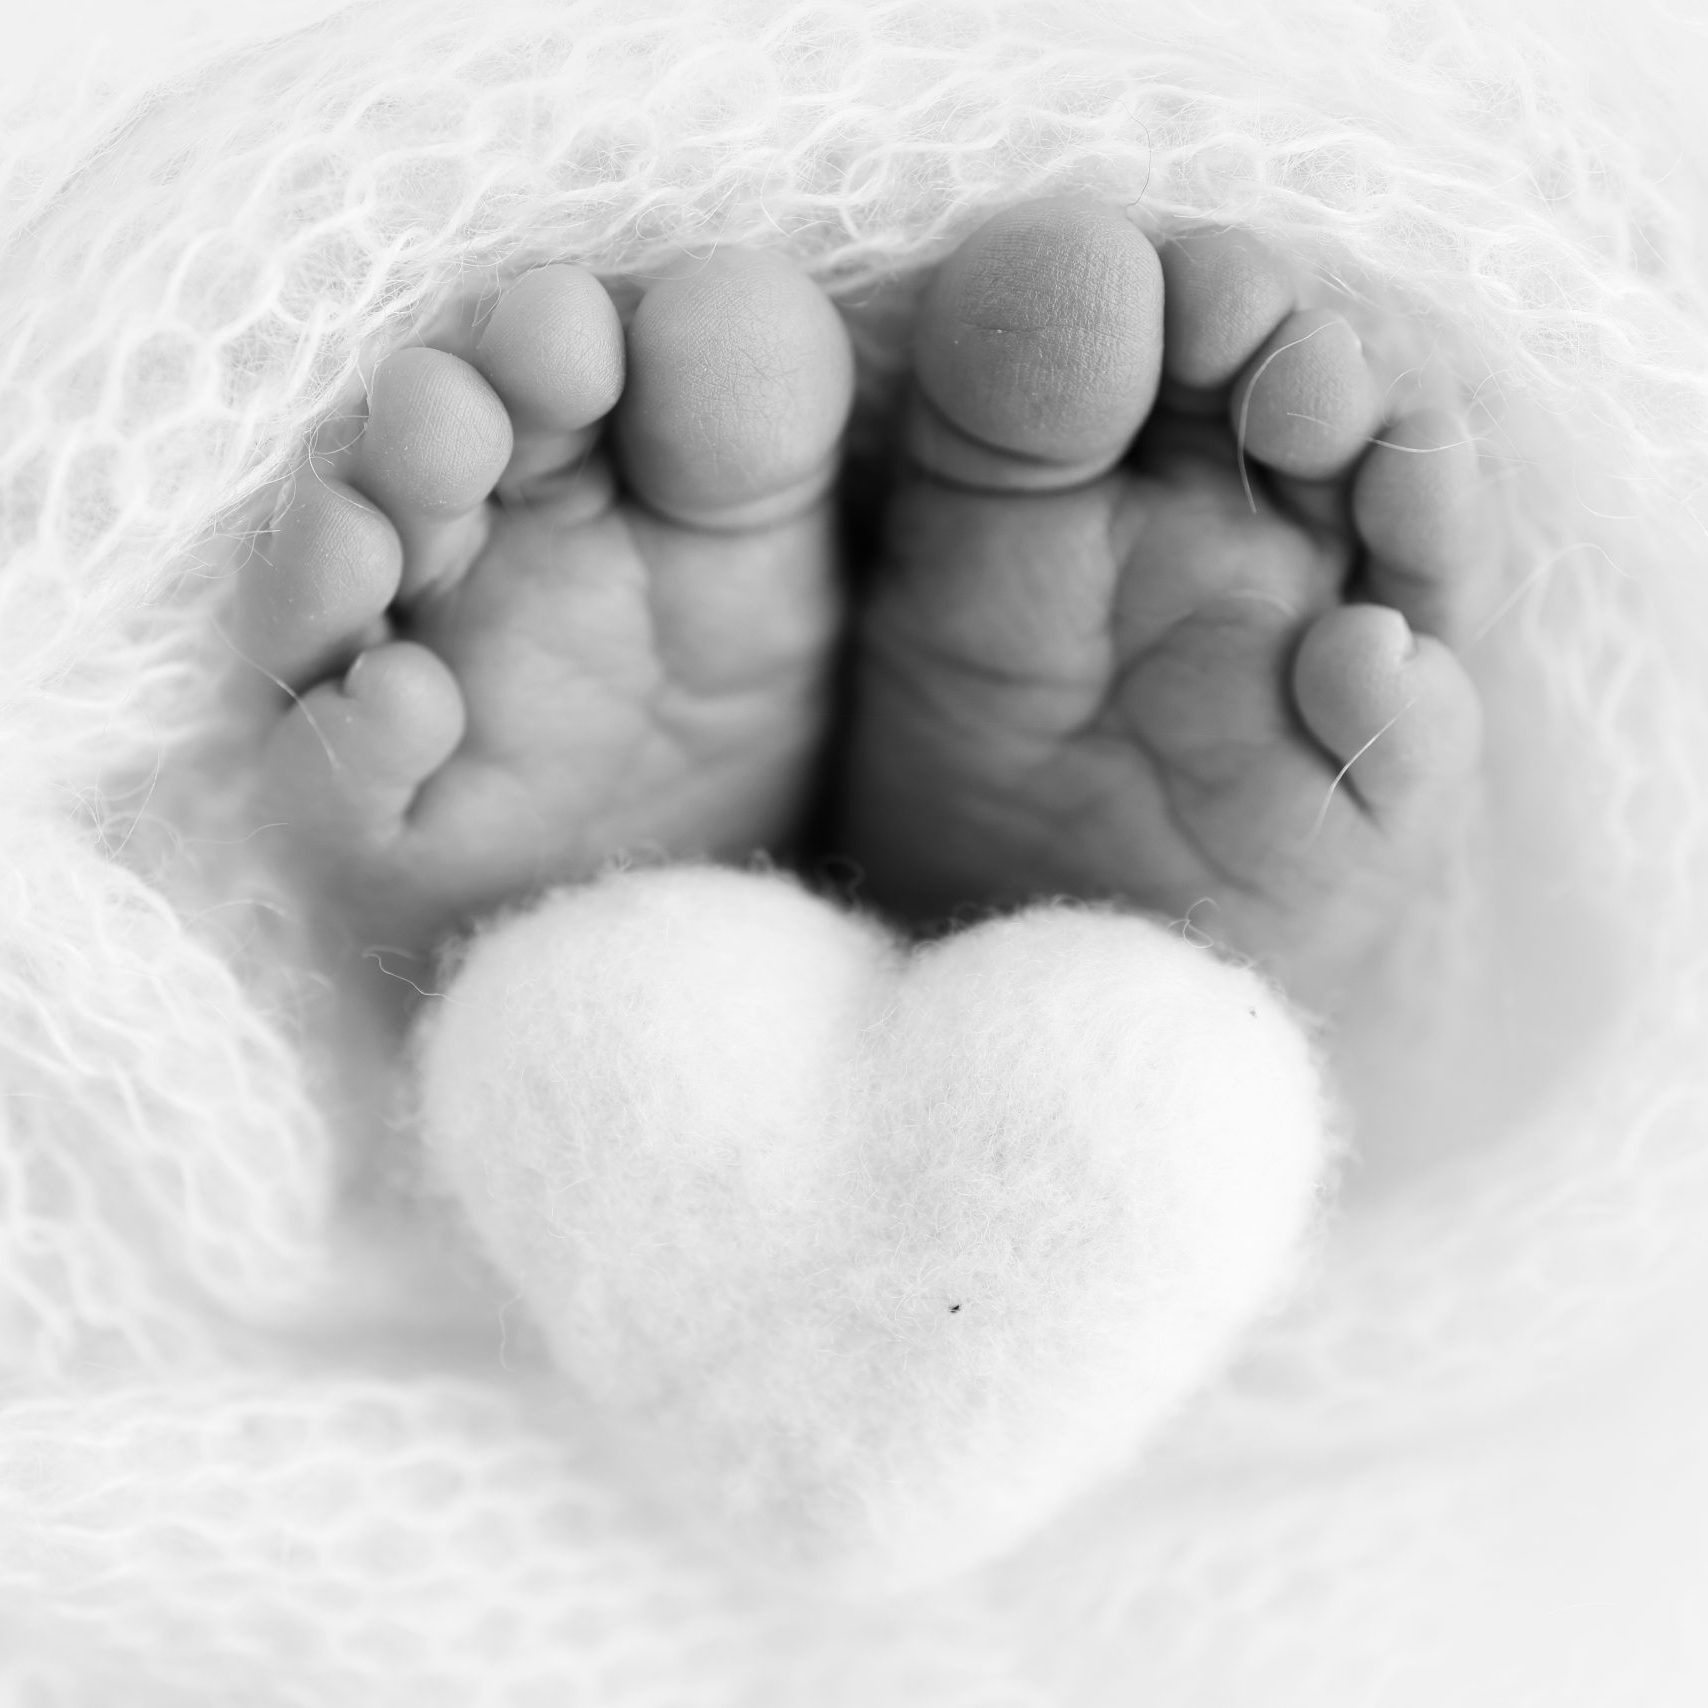 The tiny foot of a newborn baby. Soft feet of a new born in a wool blanket. Close up of toes, heels and feet of a newborn. Knitted heart in the legs of baby. Macro photography. Black and white